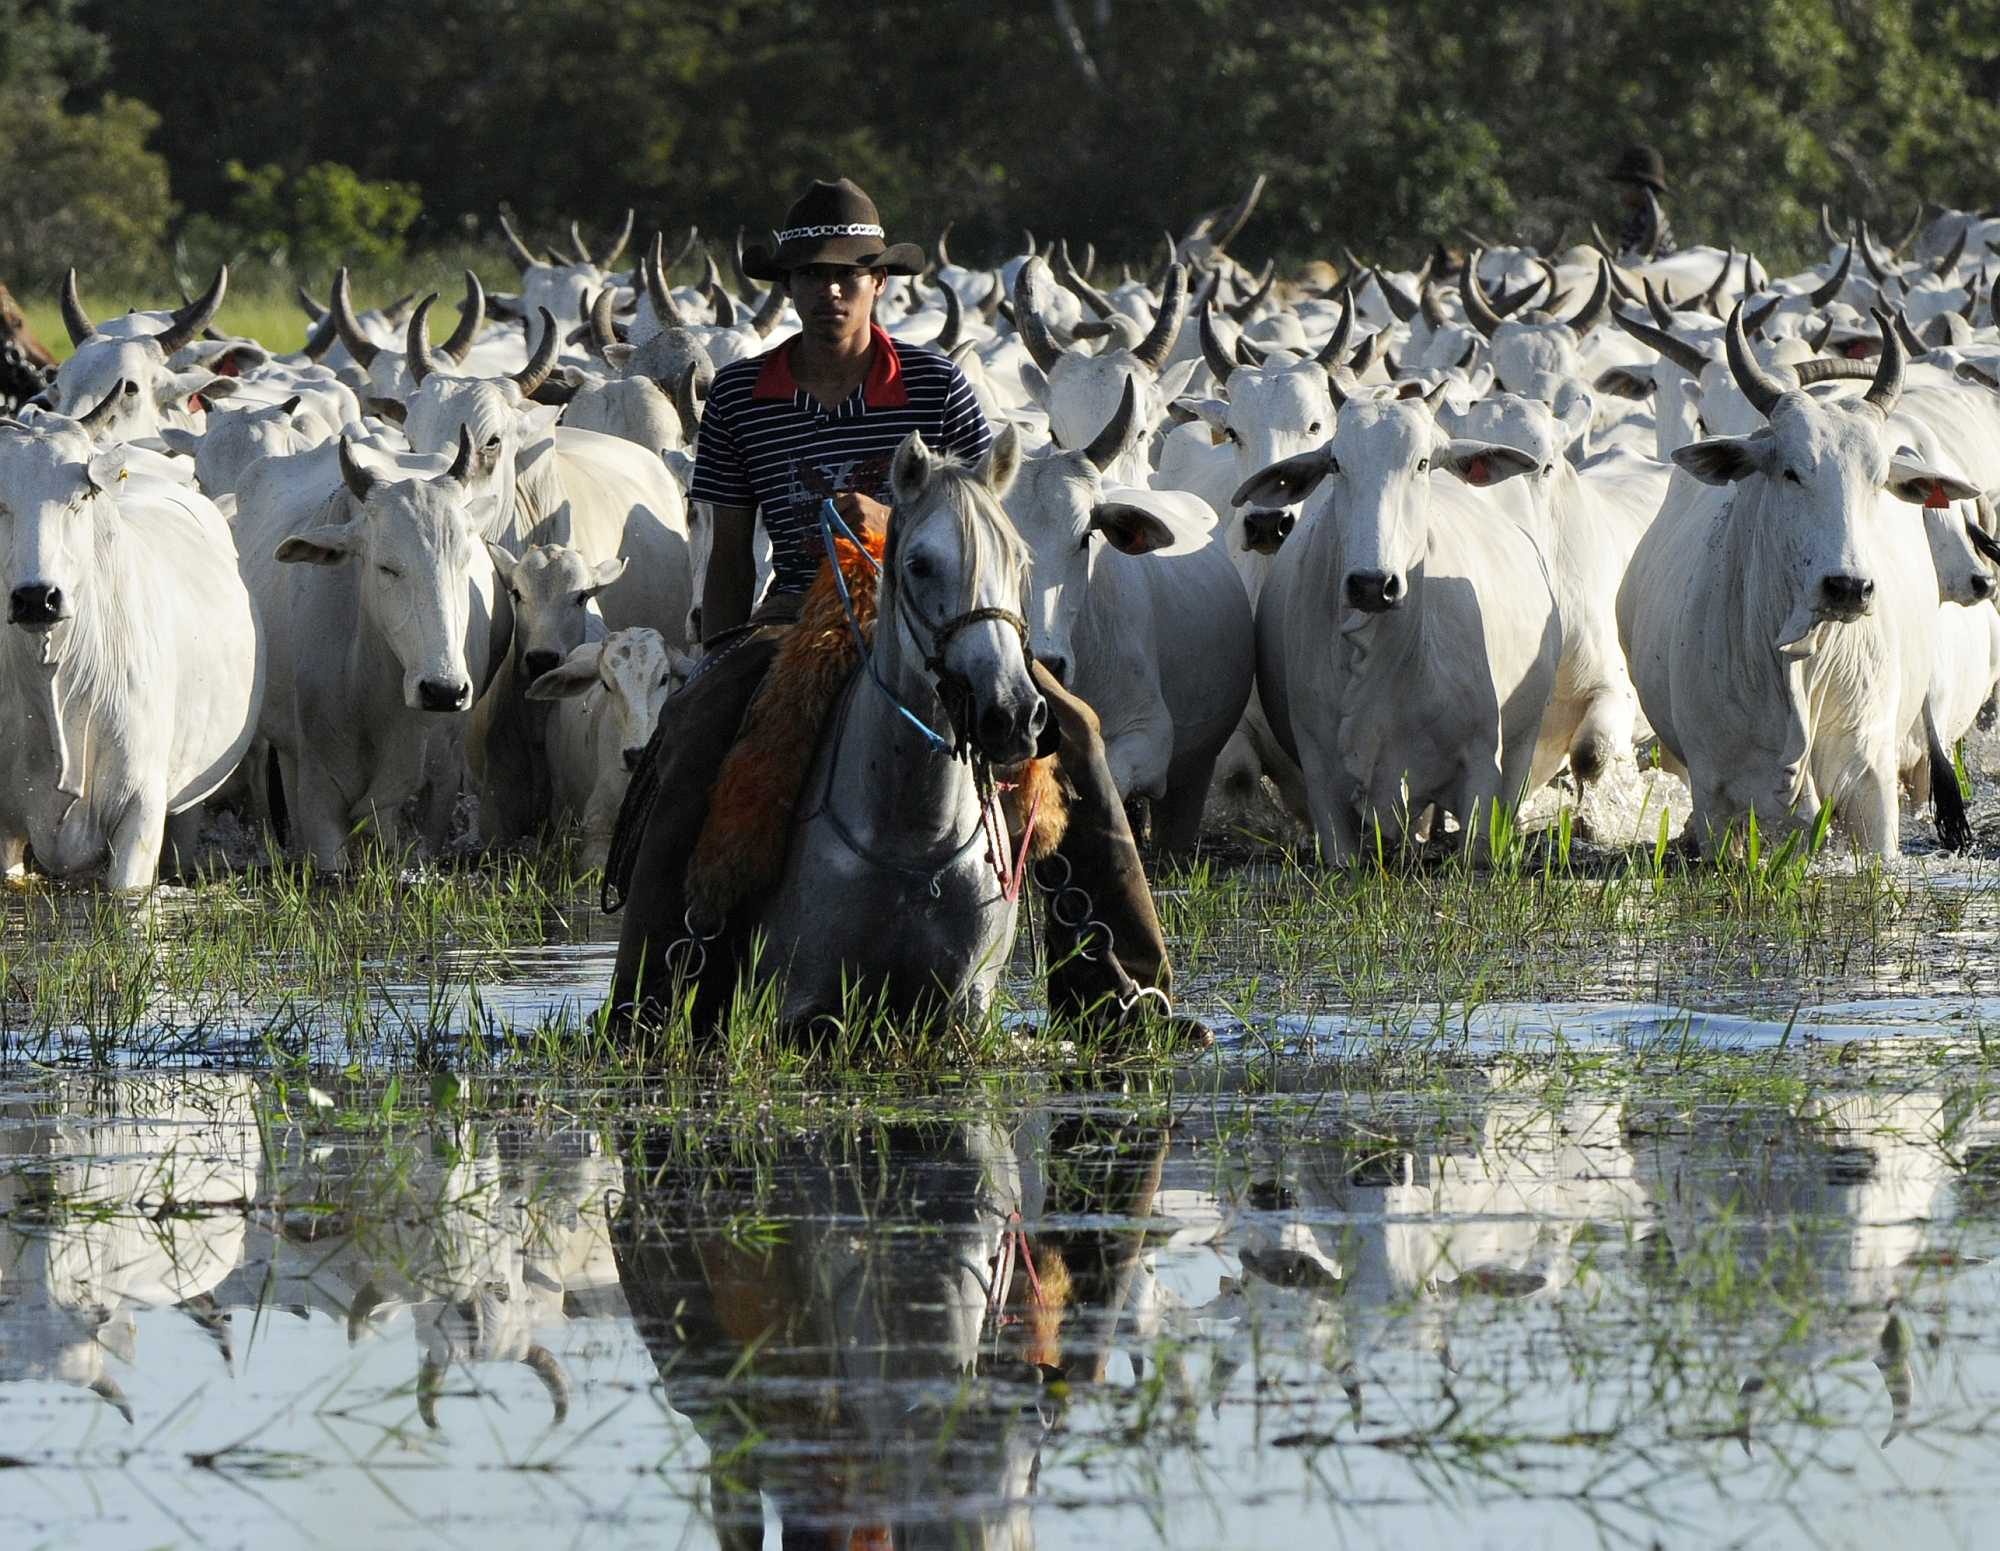 Many areas in the Amazon are cleared to raise cattle - Adriano Gambarini/WWF-Brasil